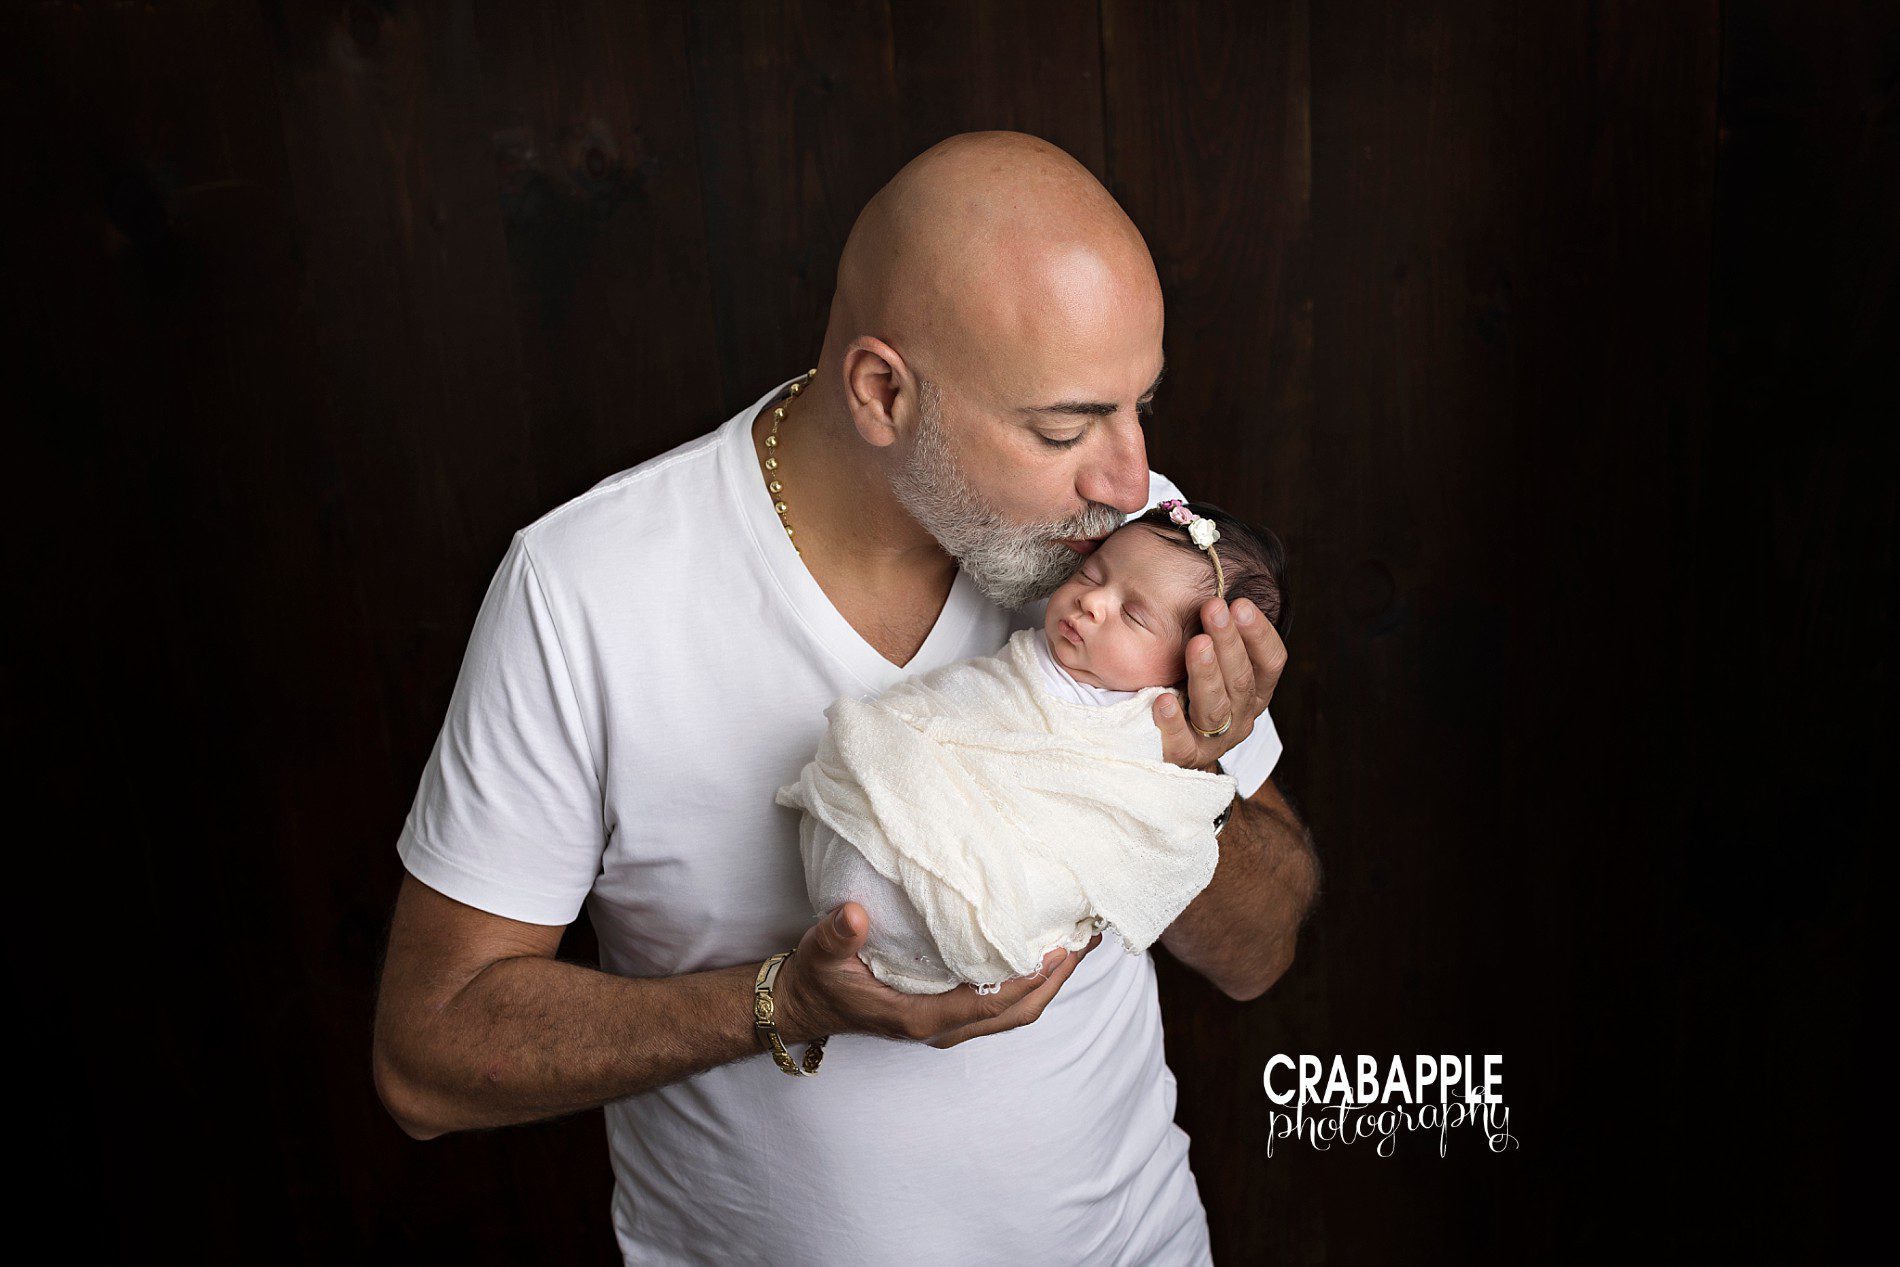 pose ideas for dad and baby newborn photos 